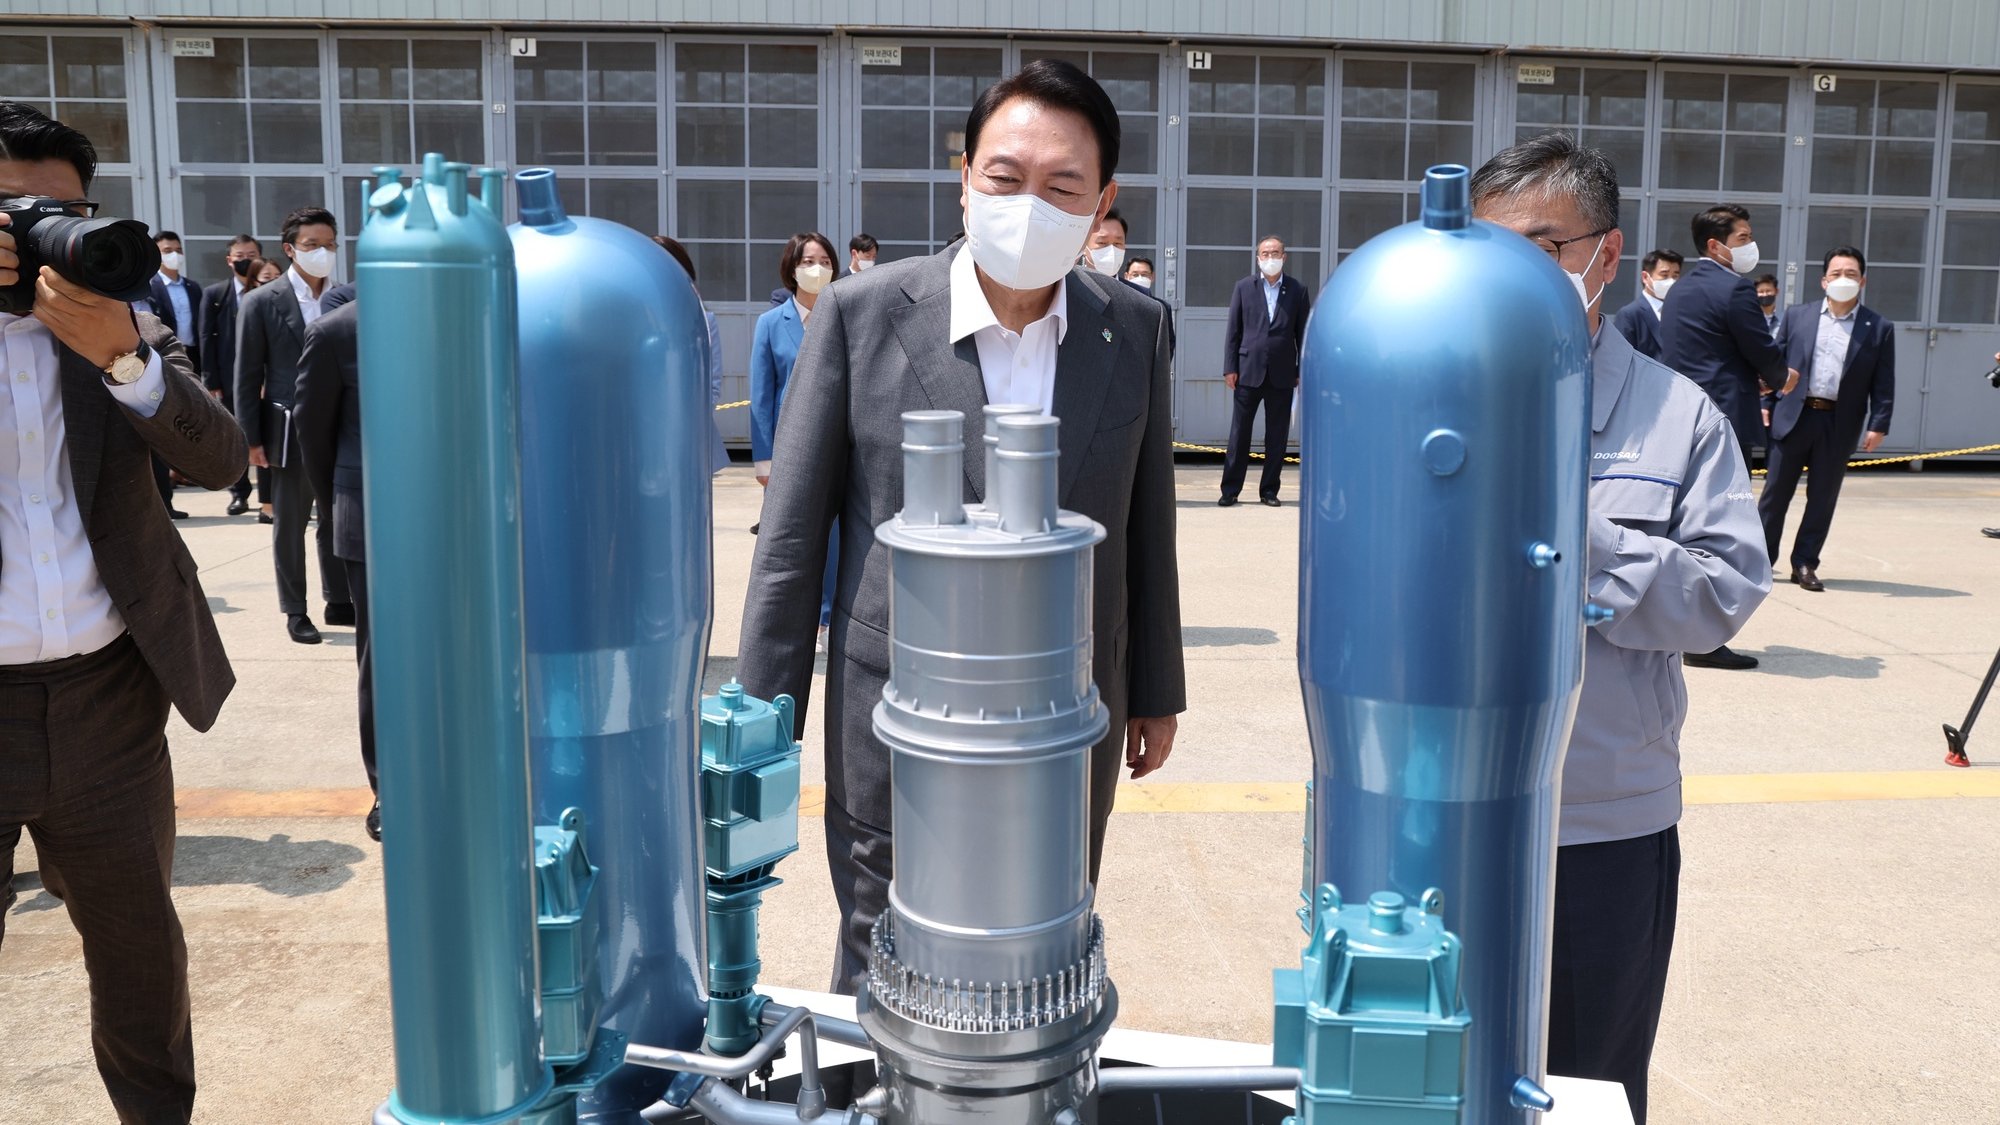 epa10027061 President Yoon Suk-yeol (C) views a miniature model of a South Korean-built APR1400 reactor as he tours a nuclear reactor factory of Doosan Enerbility in Changwon, South Korea, 22 June 2022. Yoon pledged to rebuild the nuclear power industry and support its expansion overseas, underscoring his commitment to reversing the nuclear phase-out policy of the previous administration.  EPA/YONHAP SOUTH KOREA OUT